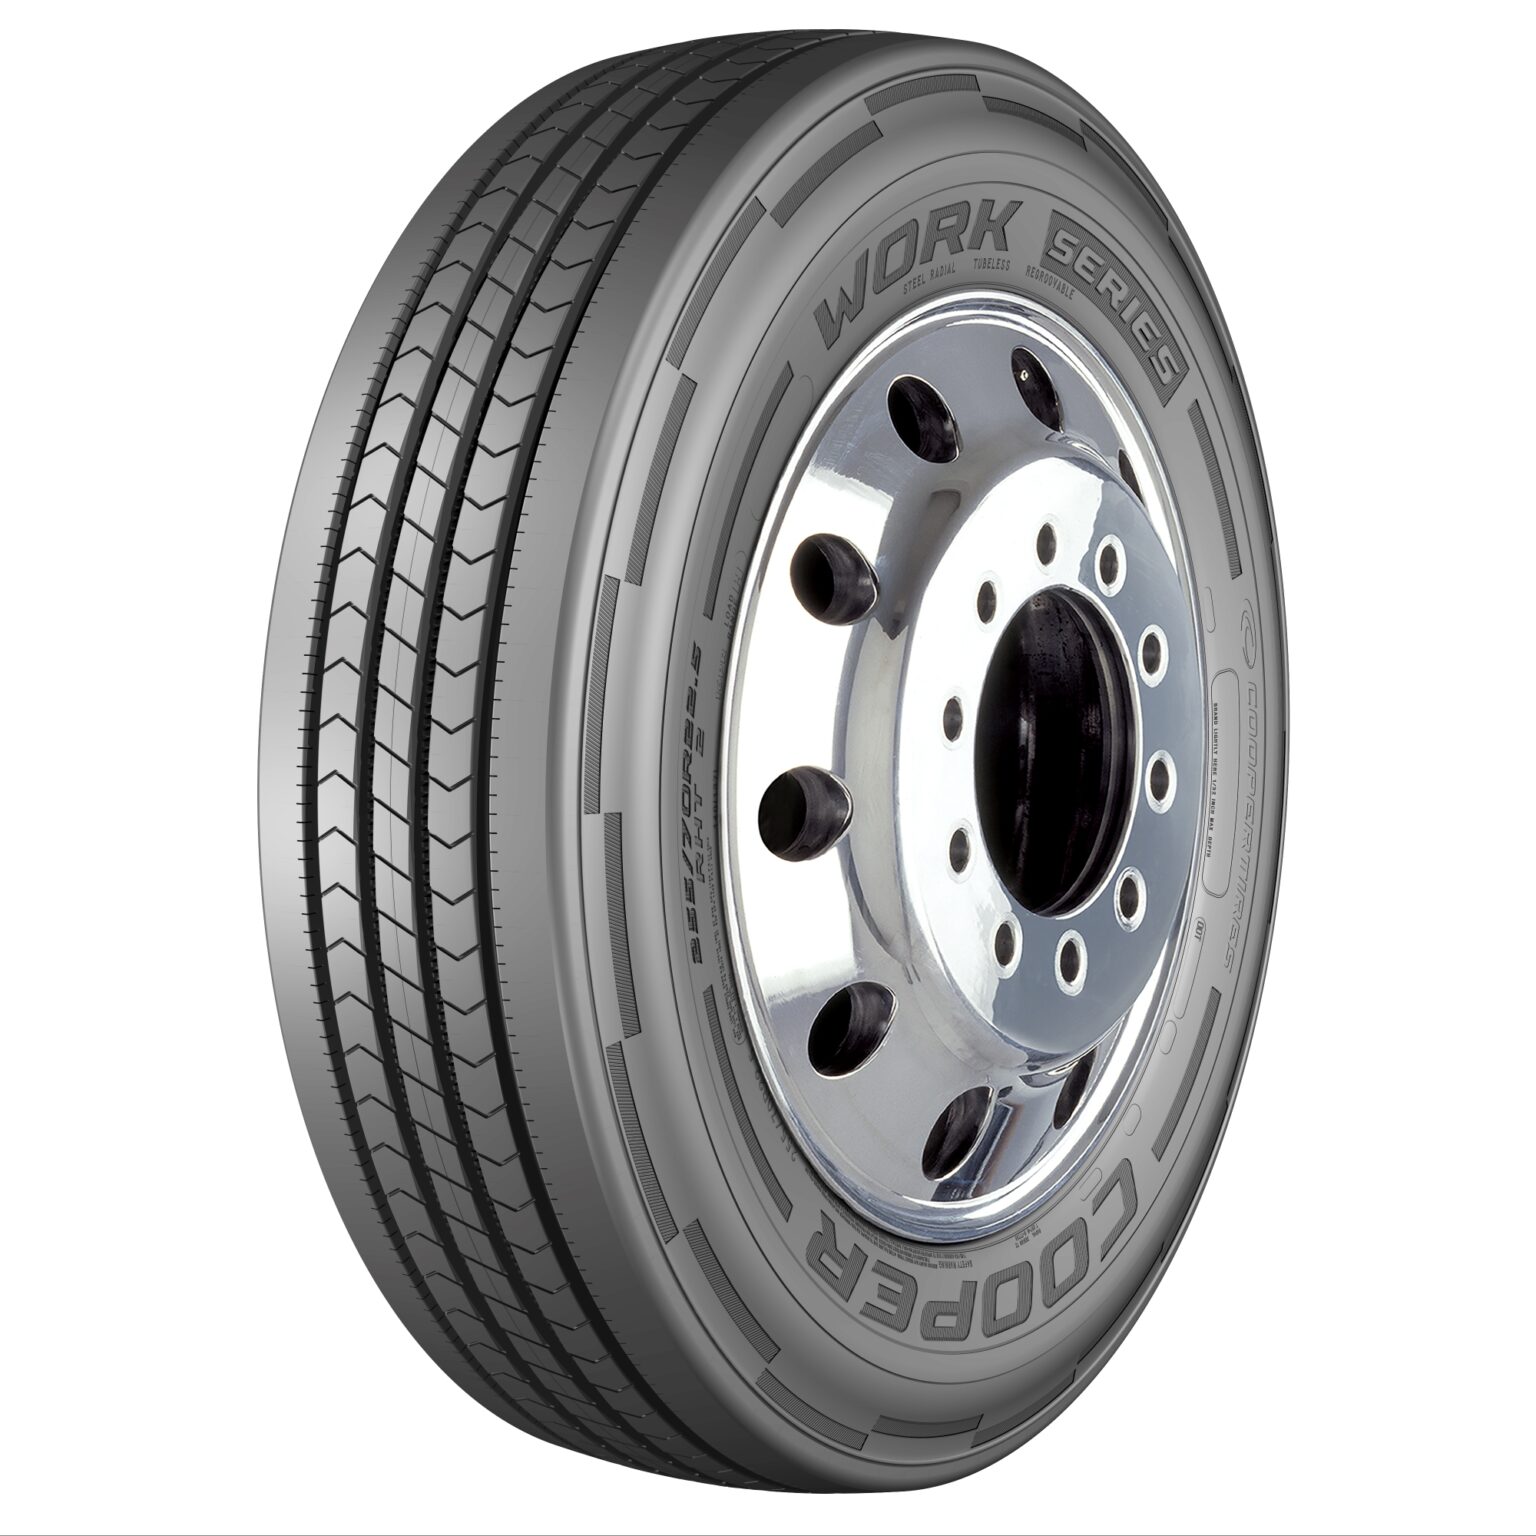 The new Cooper Work Series trailer tire for the most abrasive applications